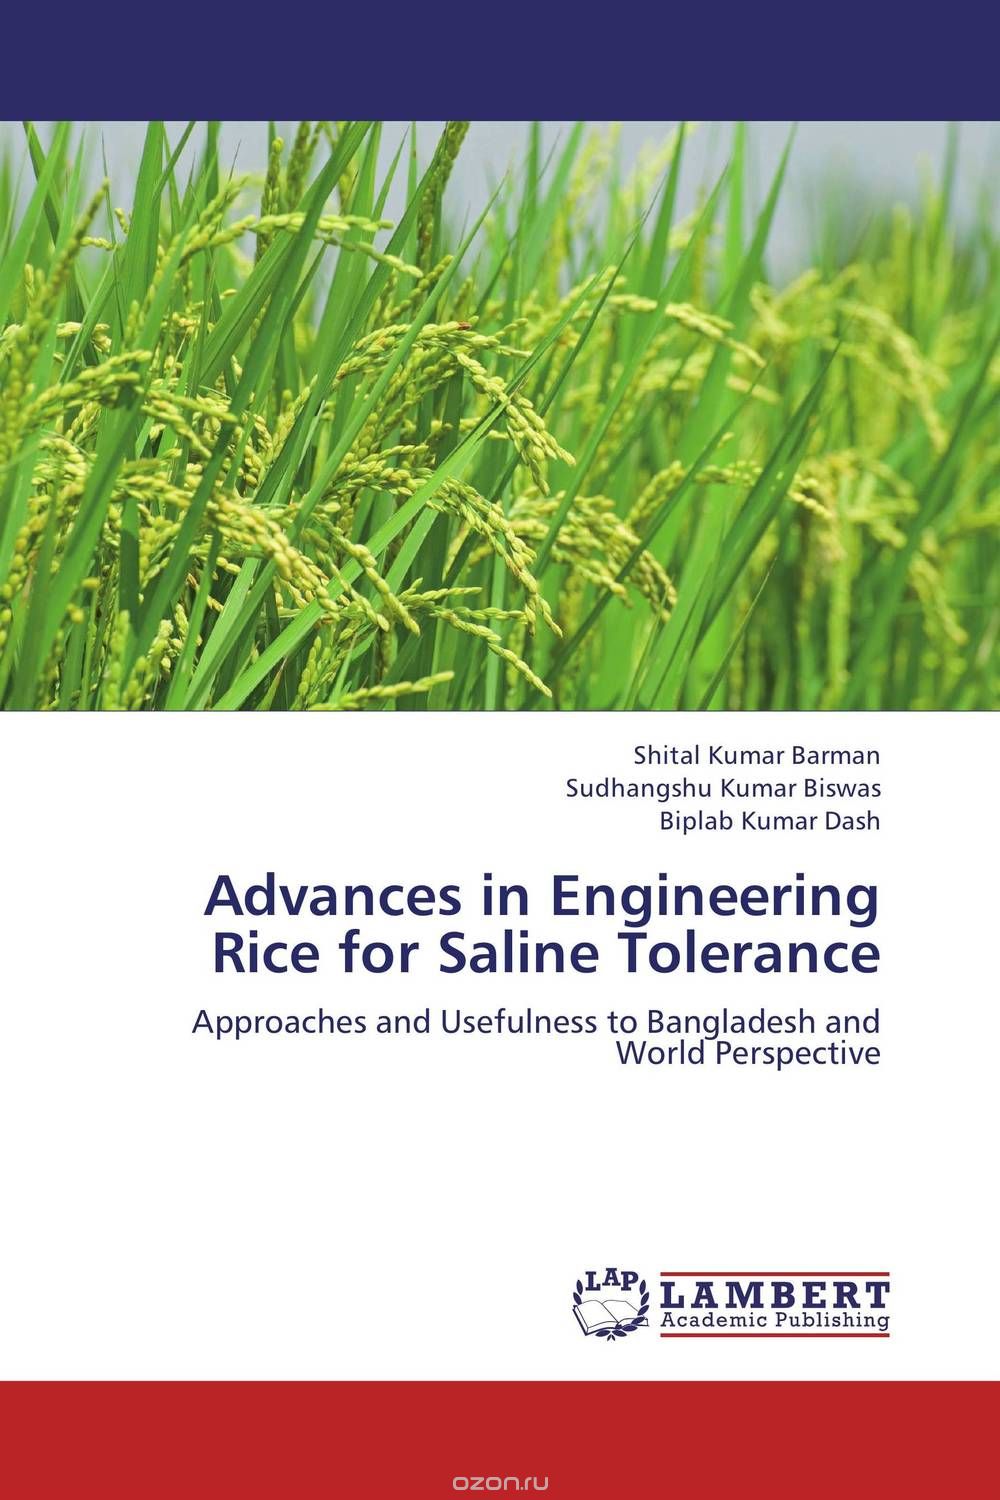 Advances in Engineering Rice for Saline Tolerance